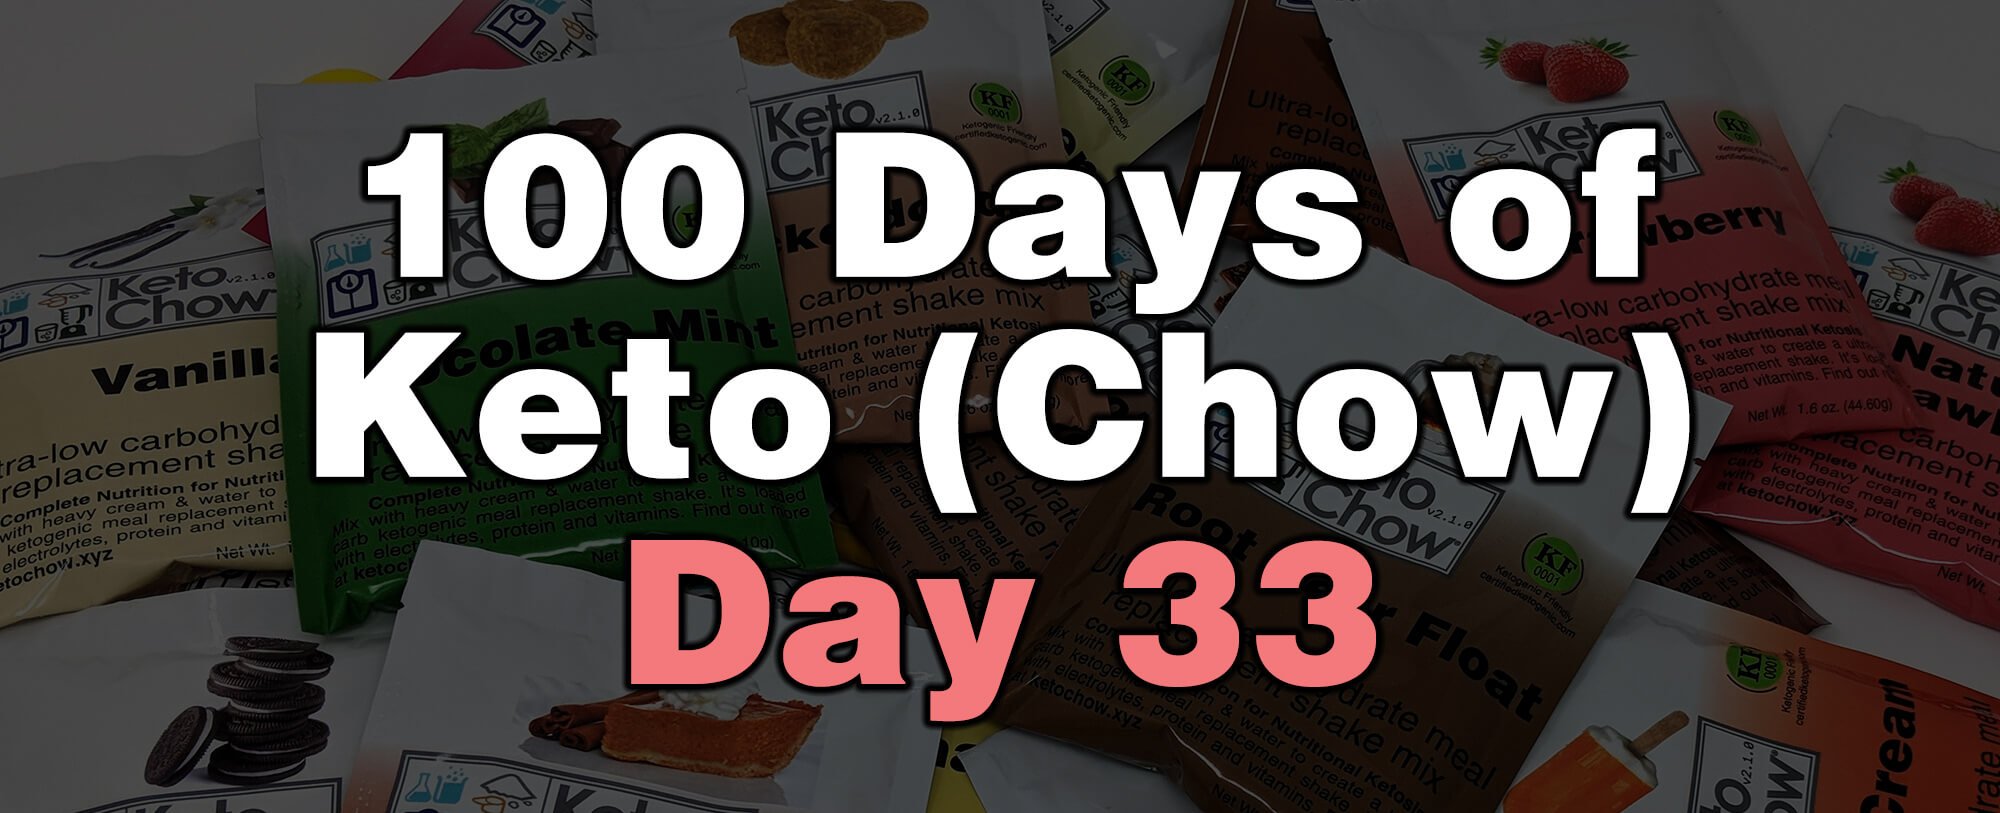 100 days of keto chow day 33